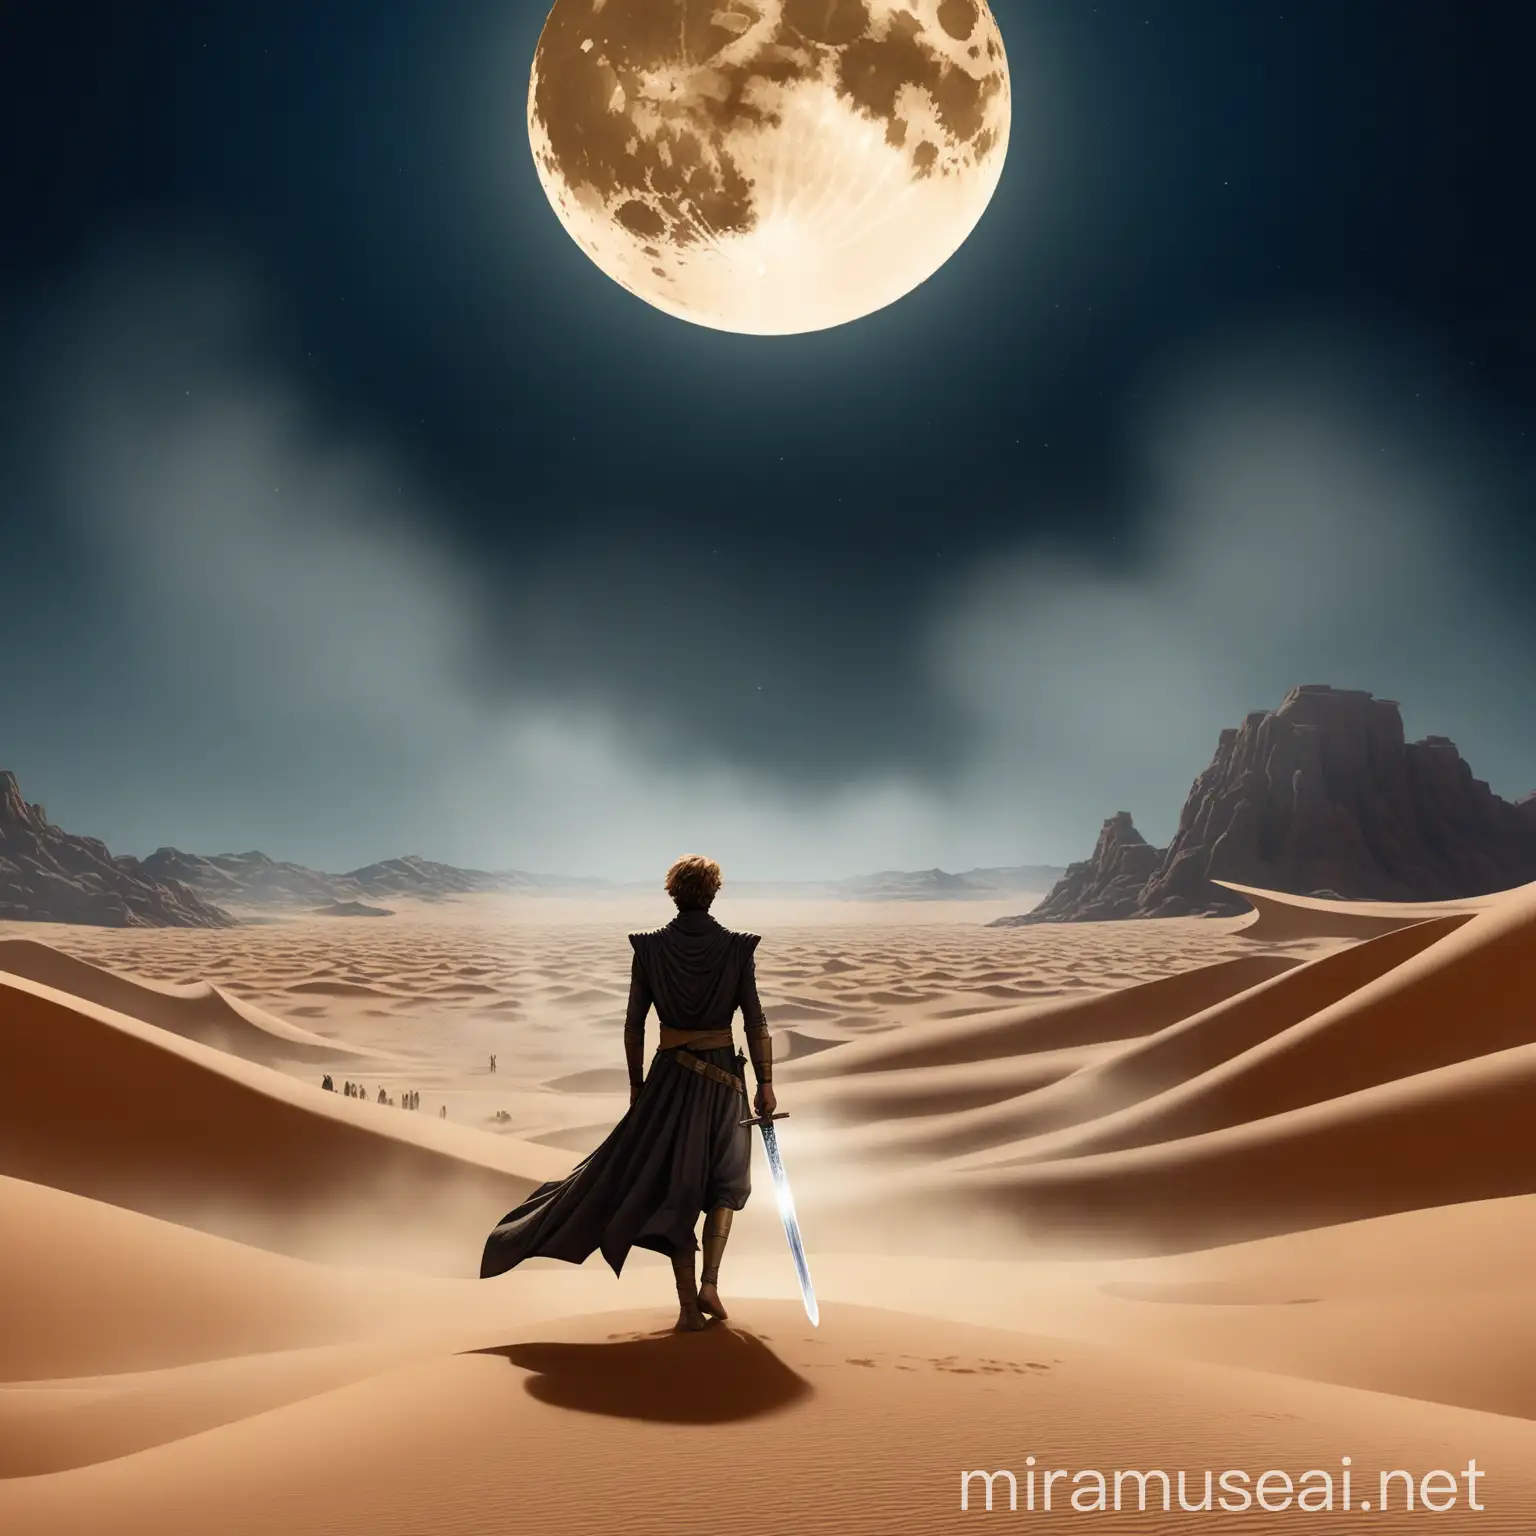 desert landscape with a man from behind, dressed like in the movie Dune with a sword, a full moon, and a mist